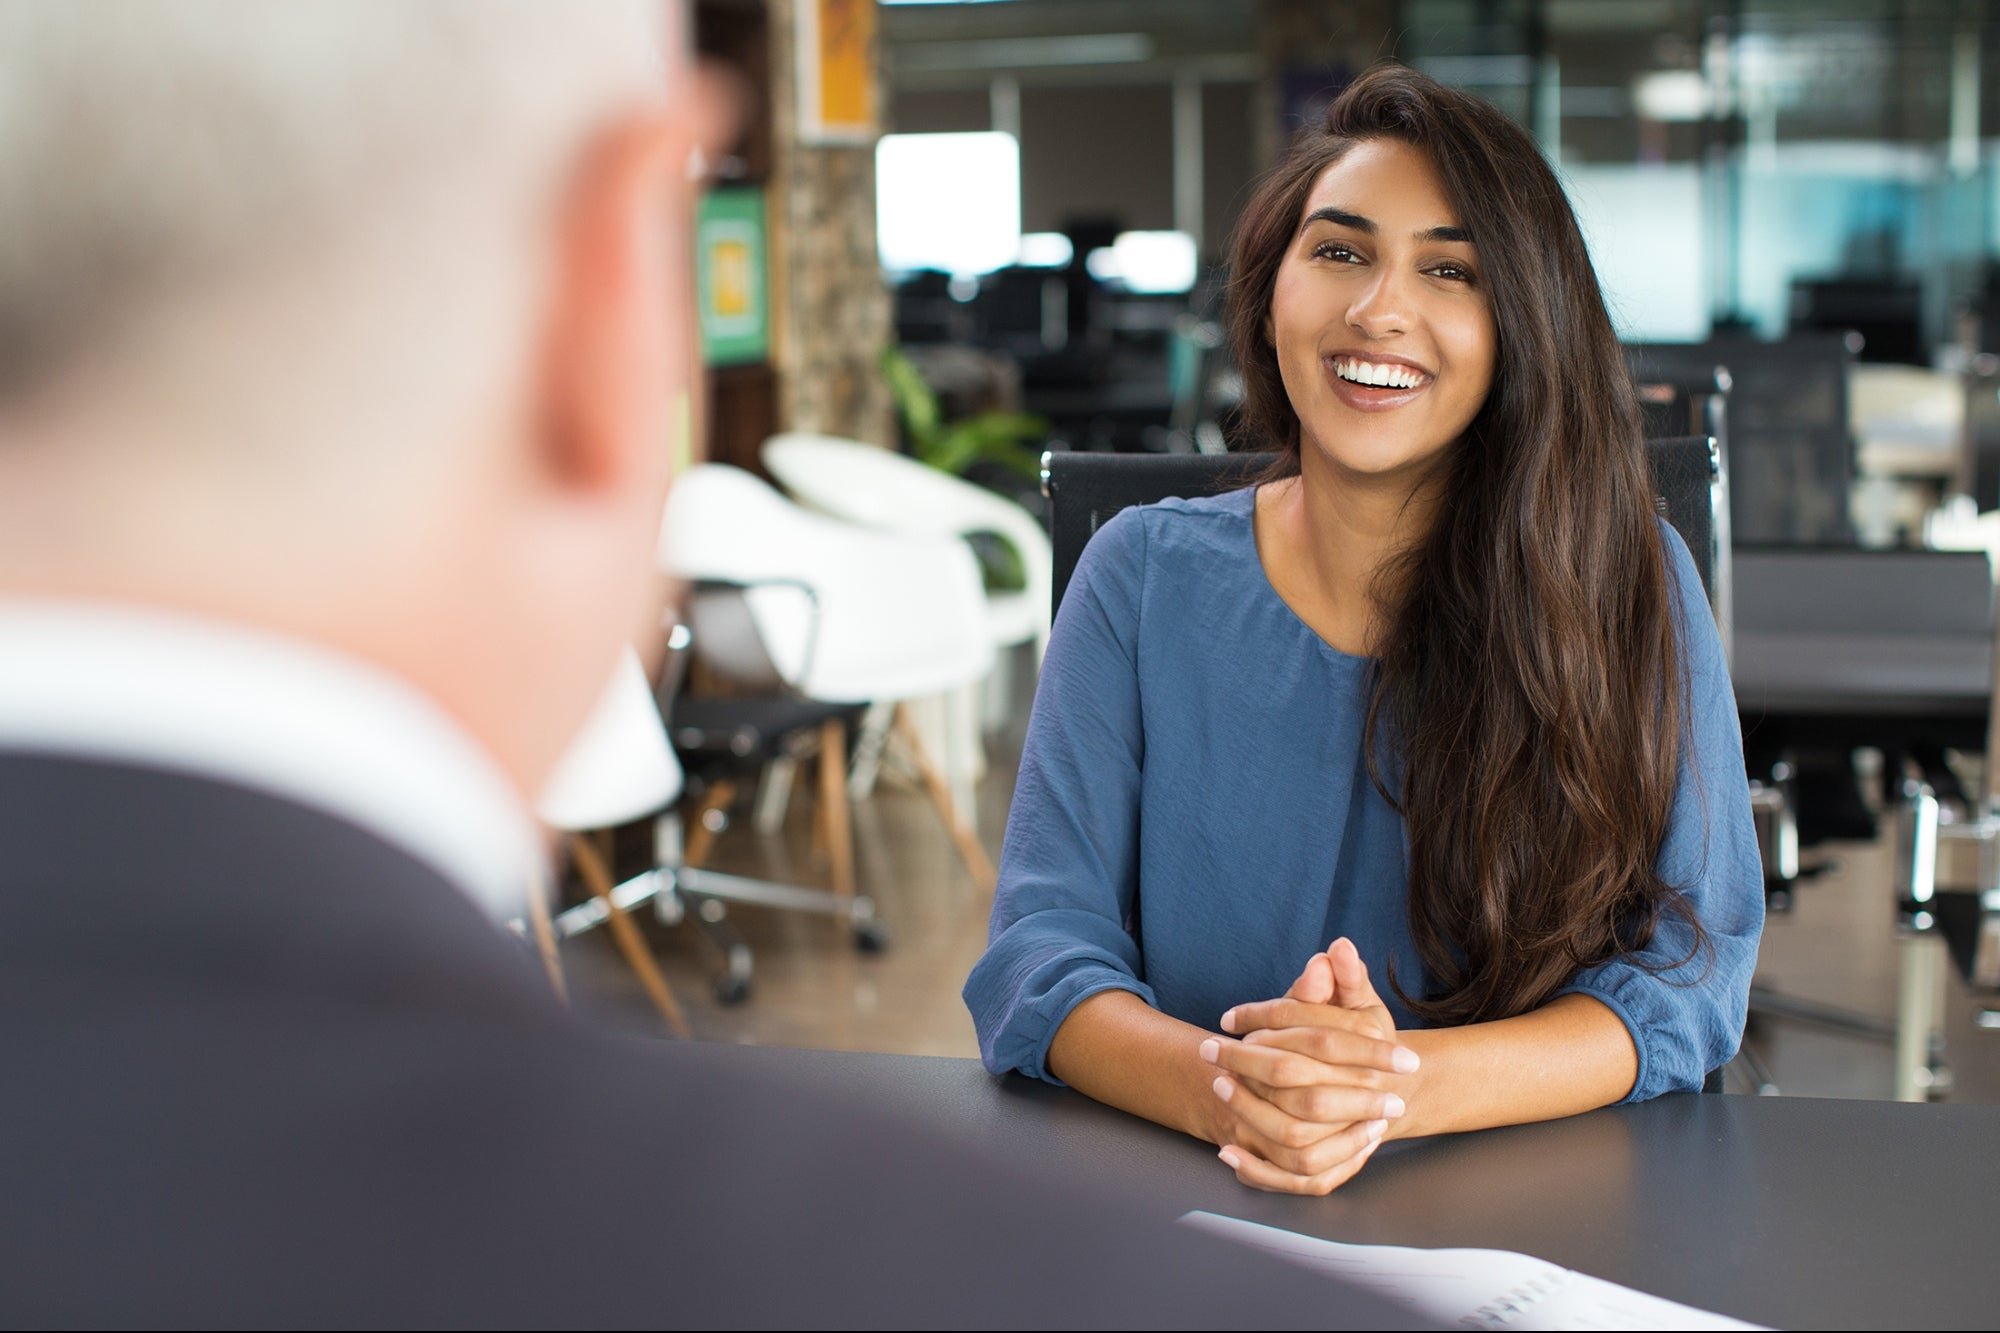 12 Good Reasons to Explain Why You Left a Job During an Interview